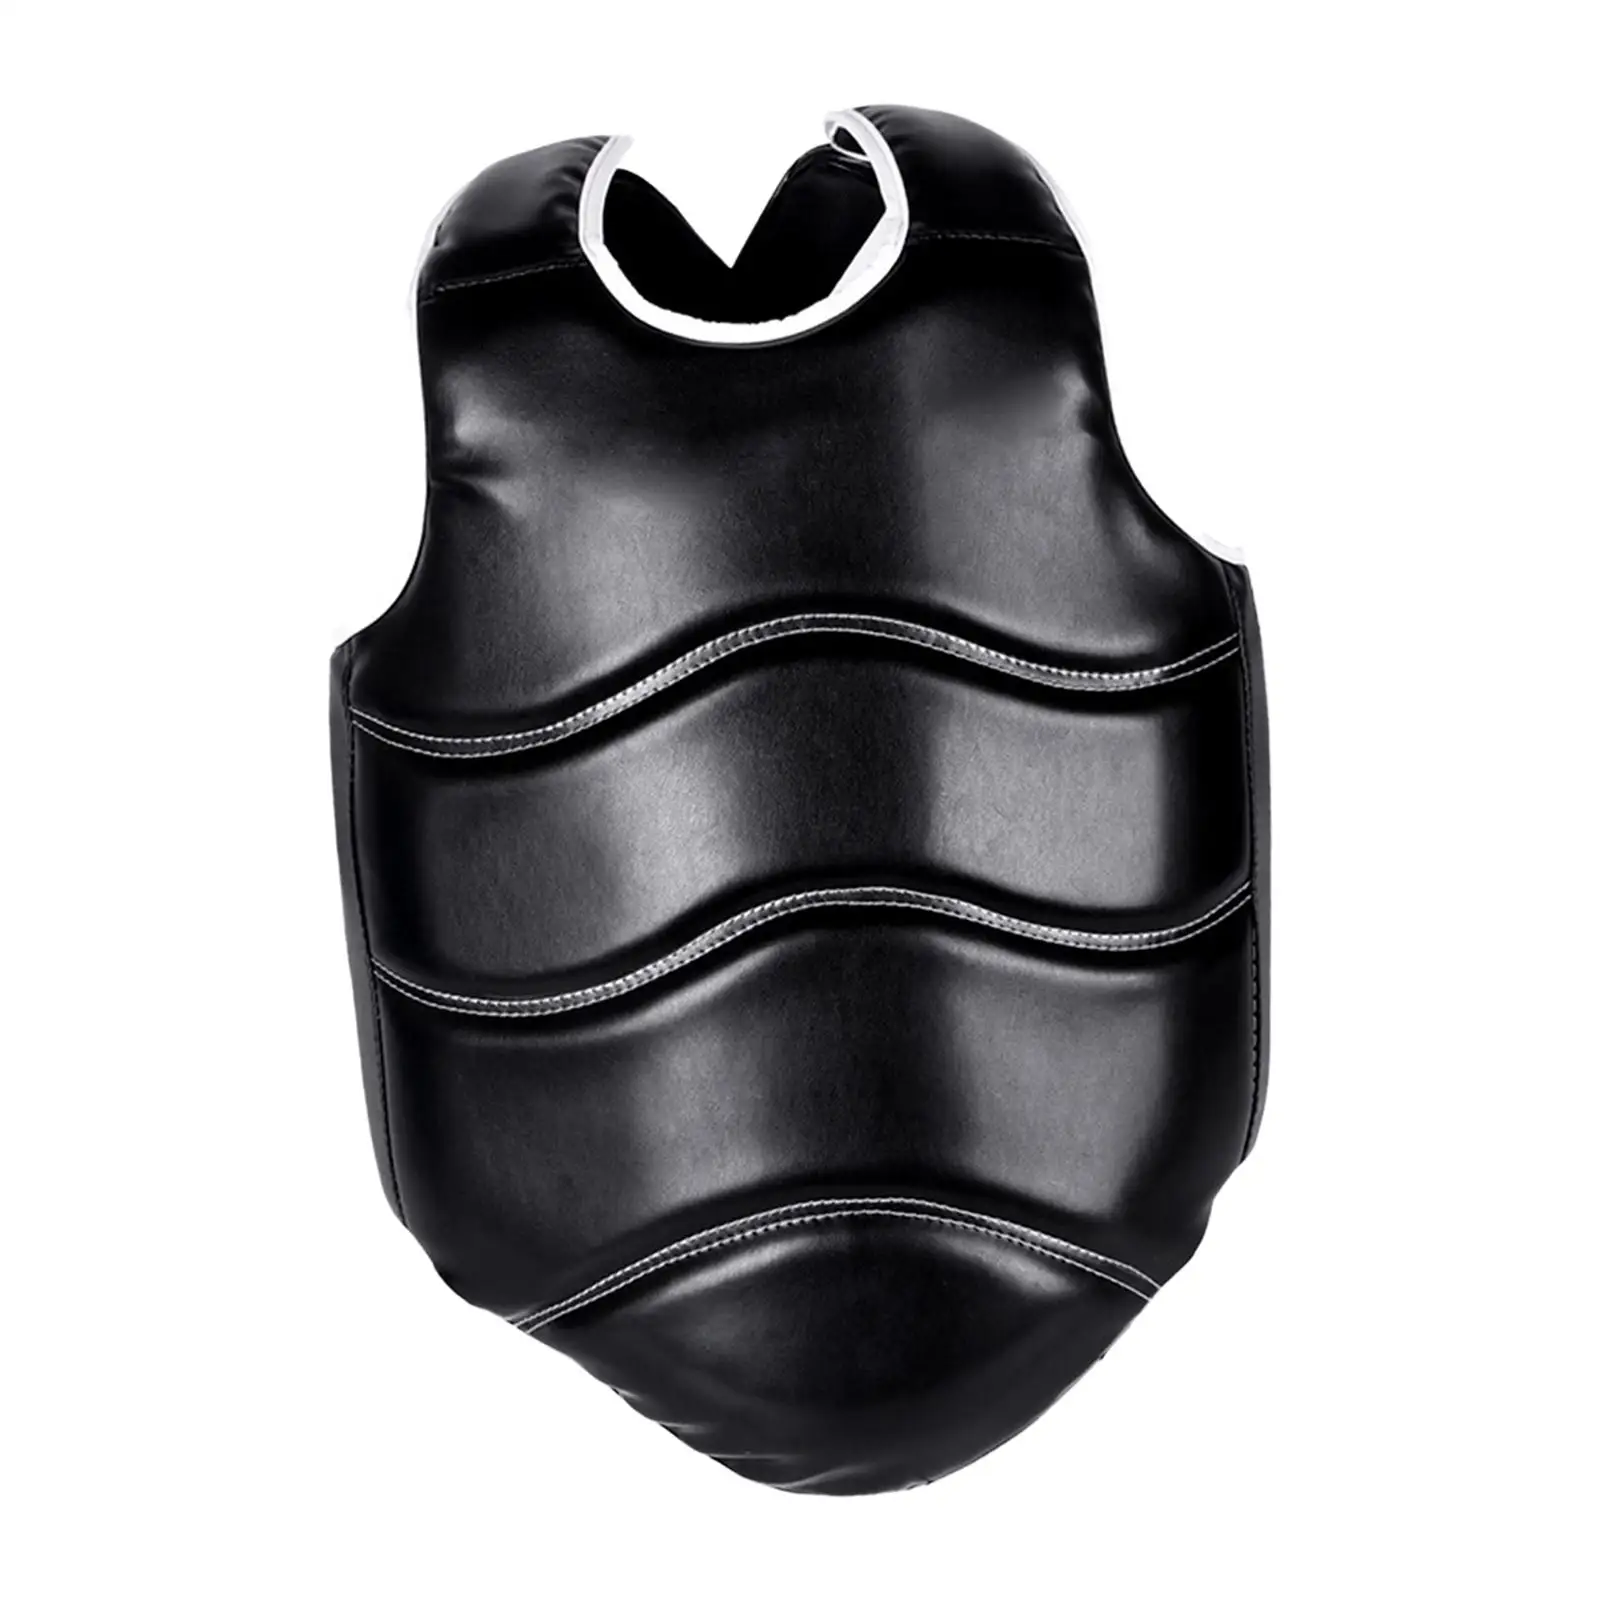 Karate Chest Protector Lightweight Bodyguard Chest Gear Boxing Chest Guard for Sanda Mma Kids Martial Arts Teen Adults